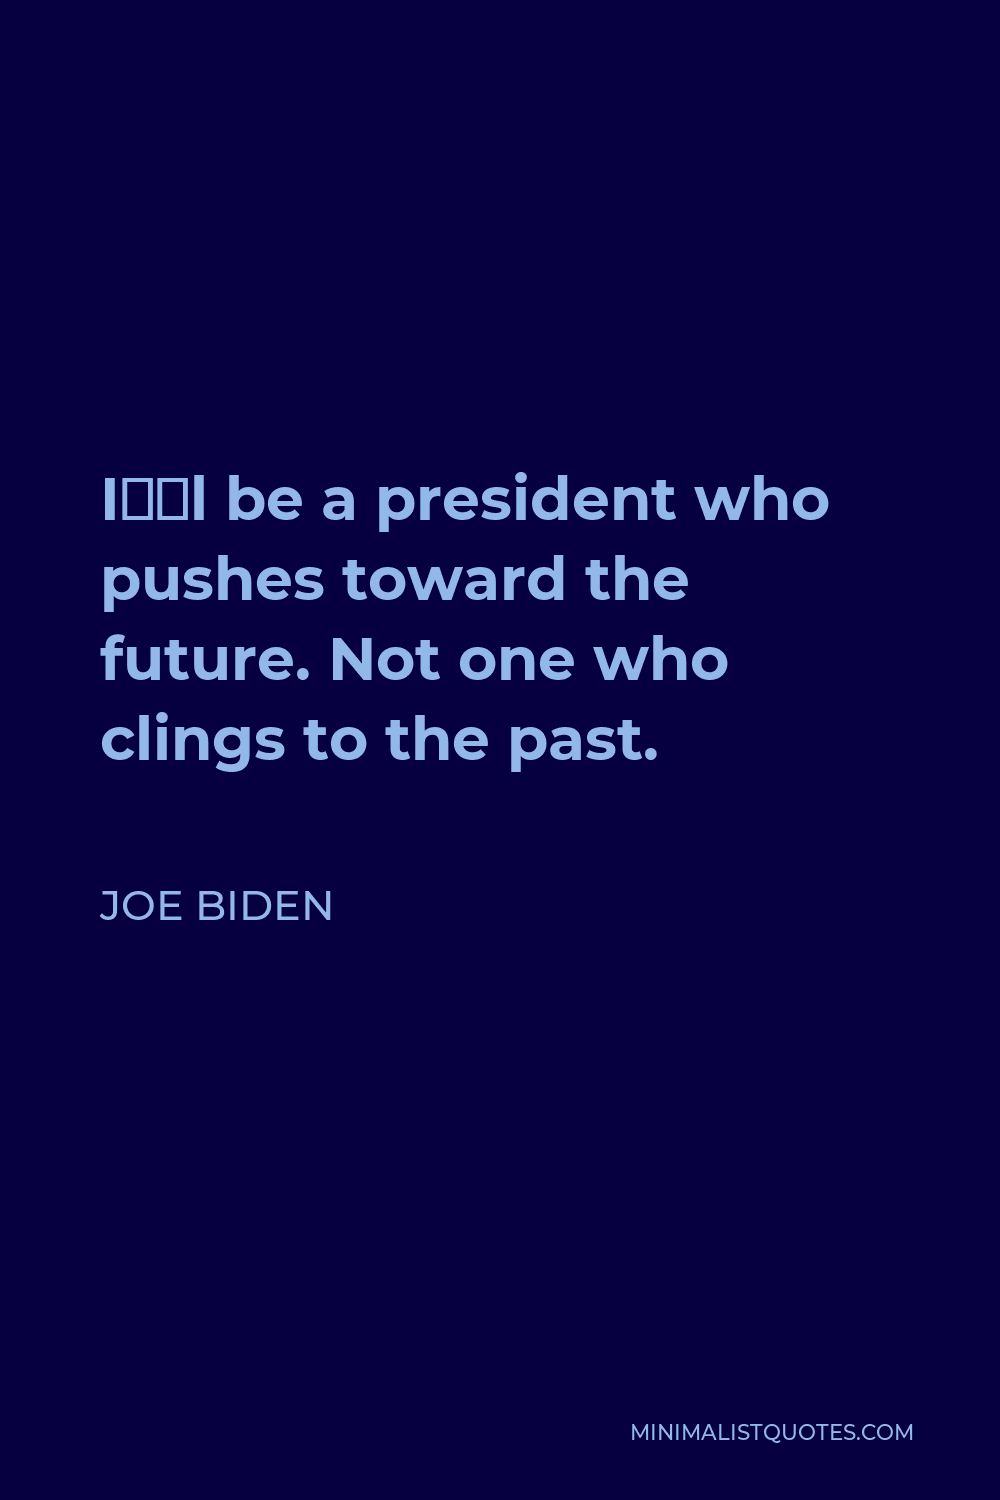 Joe Biden Quote - I’ll be a president who pushes toward the future. Not one who clings to the past.